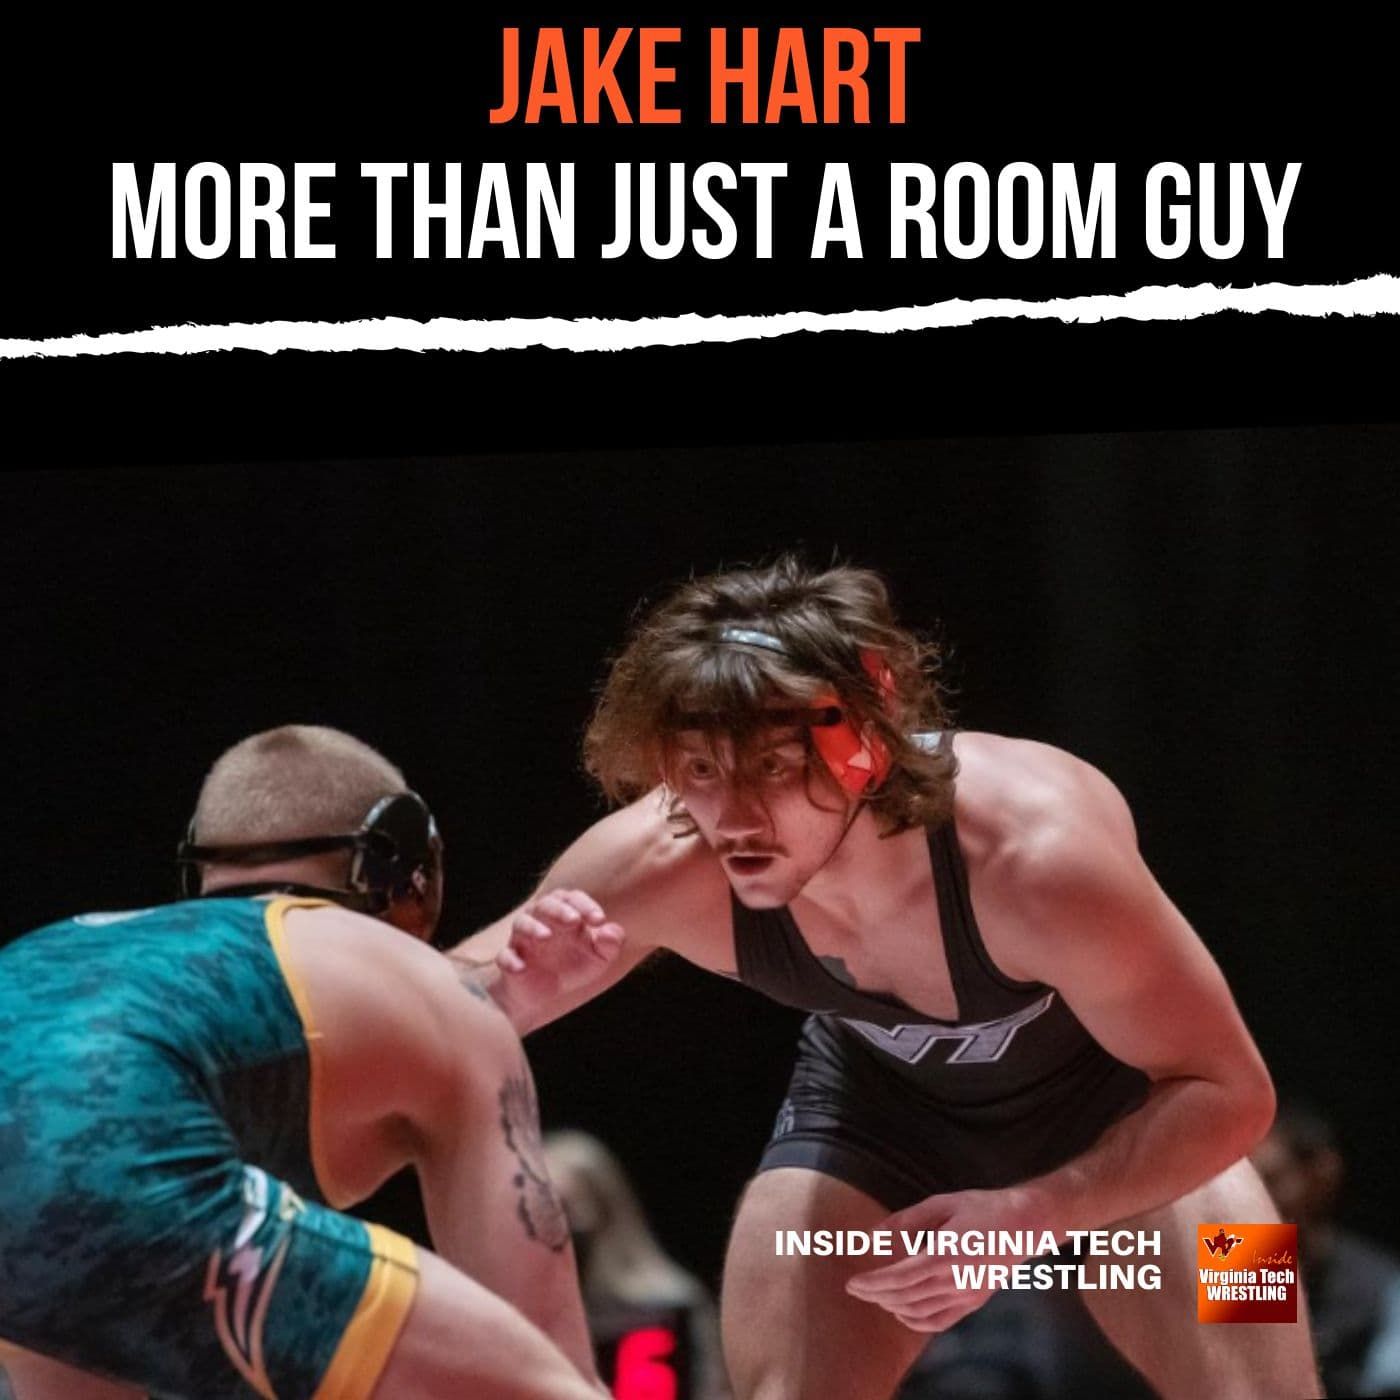 Jake Hart ready to tell wrestling's stories, his way - VT114